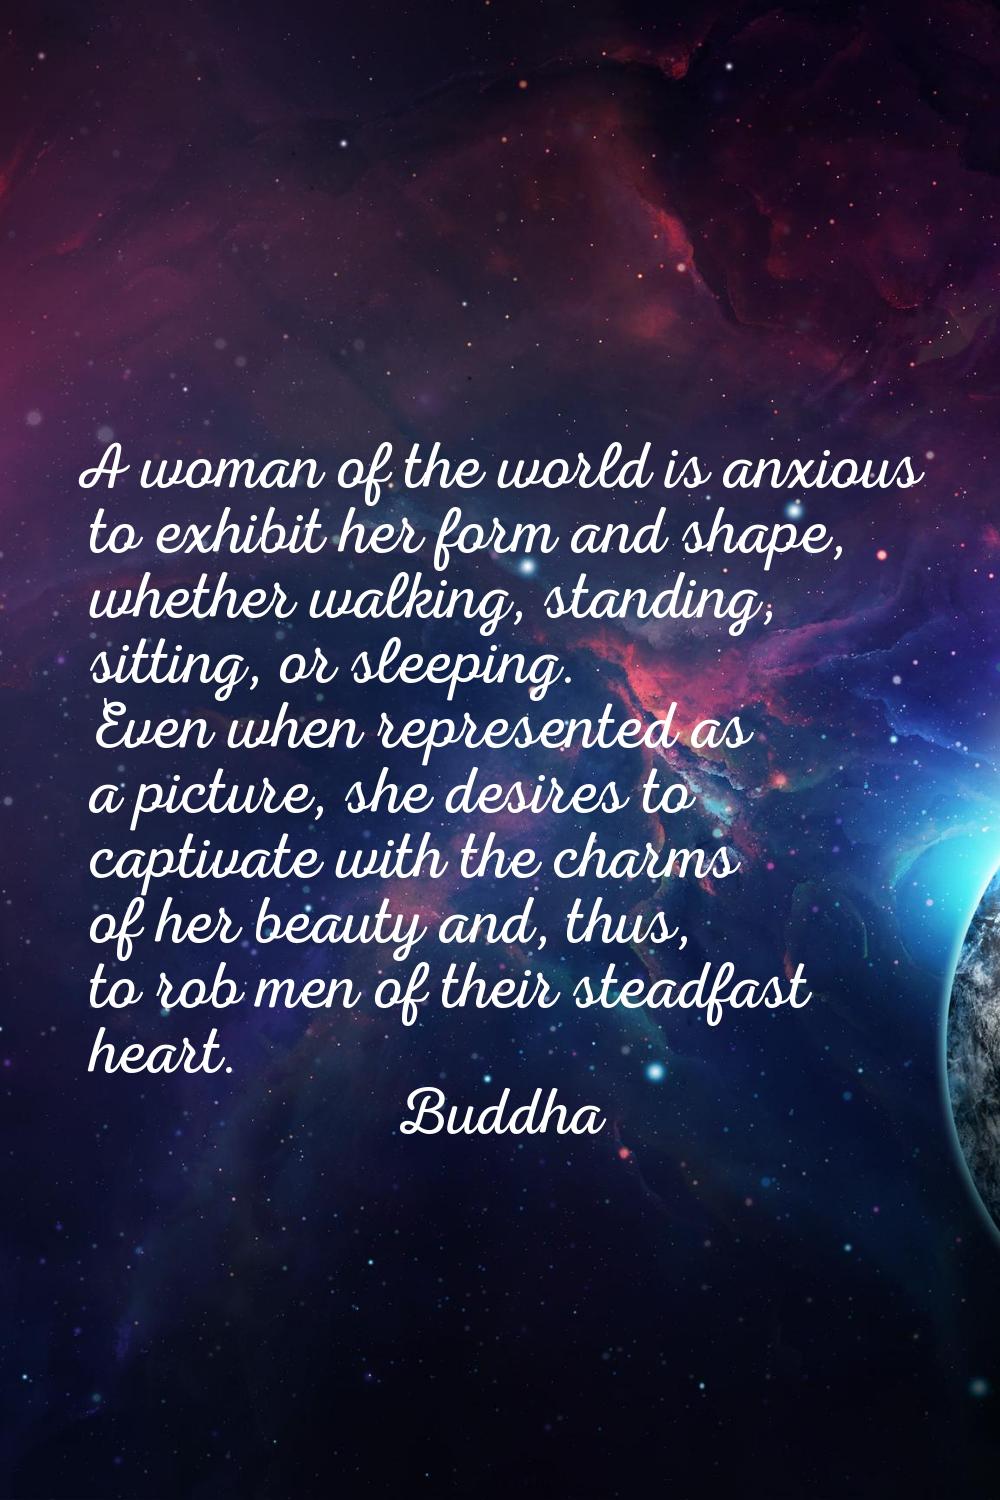 A woman of the world is anxious to exhibit her form and shape, whether walking, standing, sitting, 